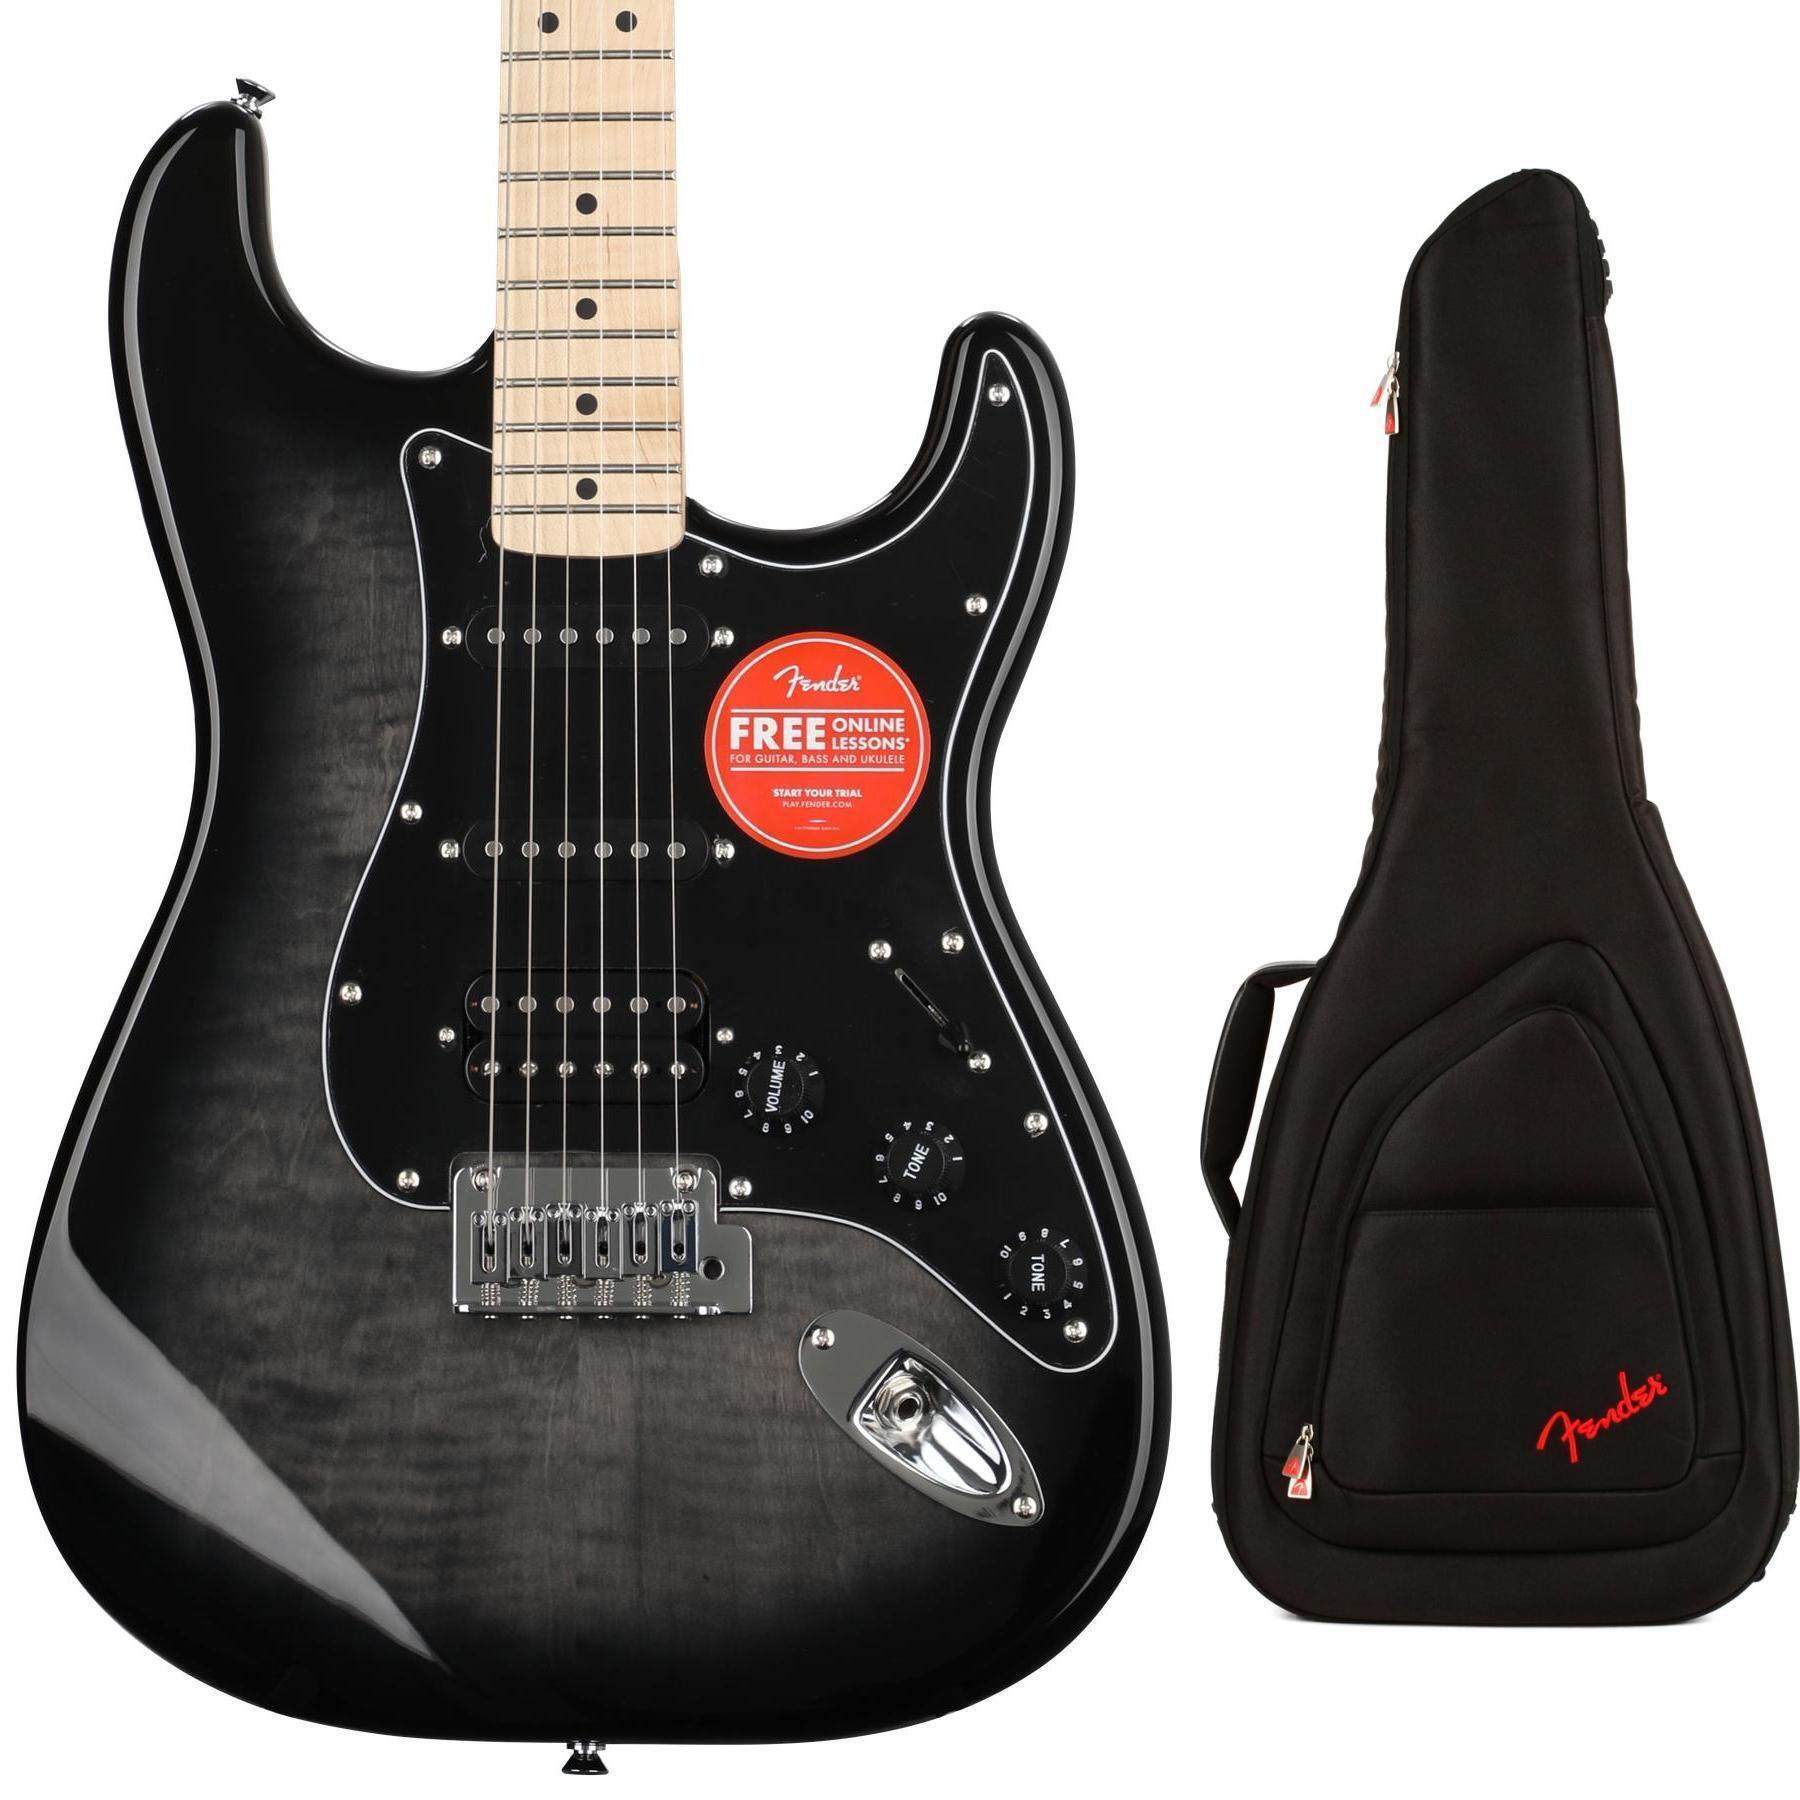 Squier Affinity Series Stratocaster Electric Guitar and Gig Bag Bundle -  Black Burst with Maple Fingerboard